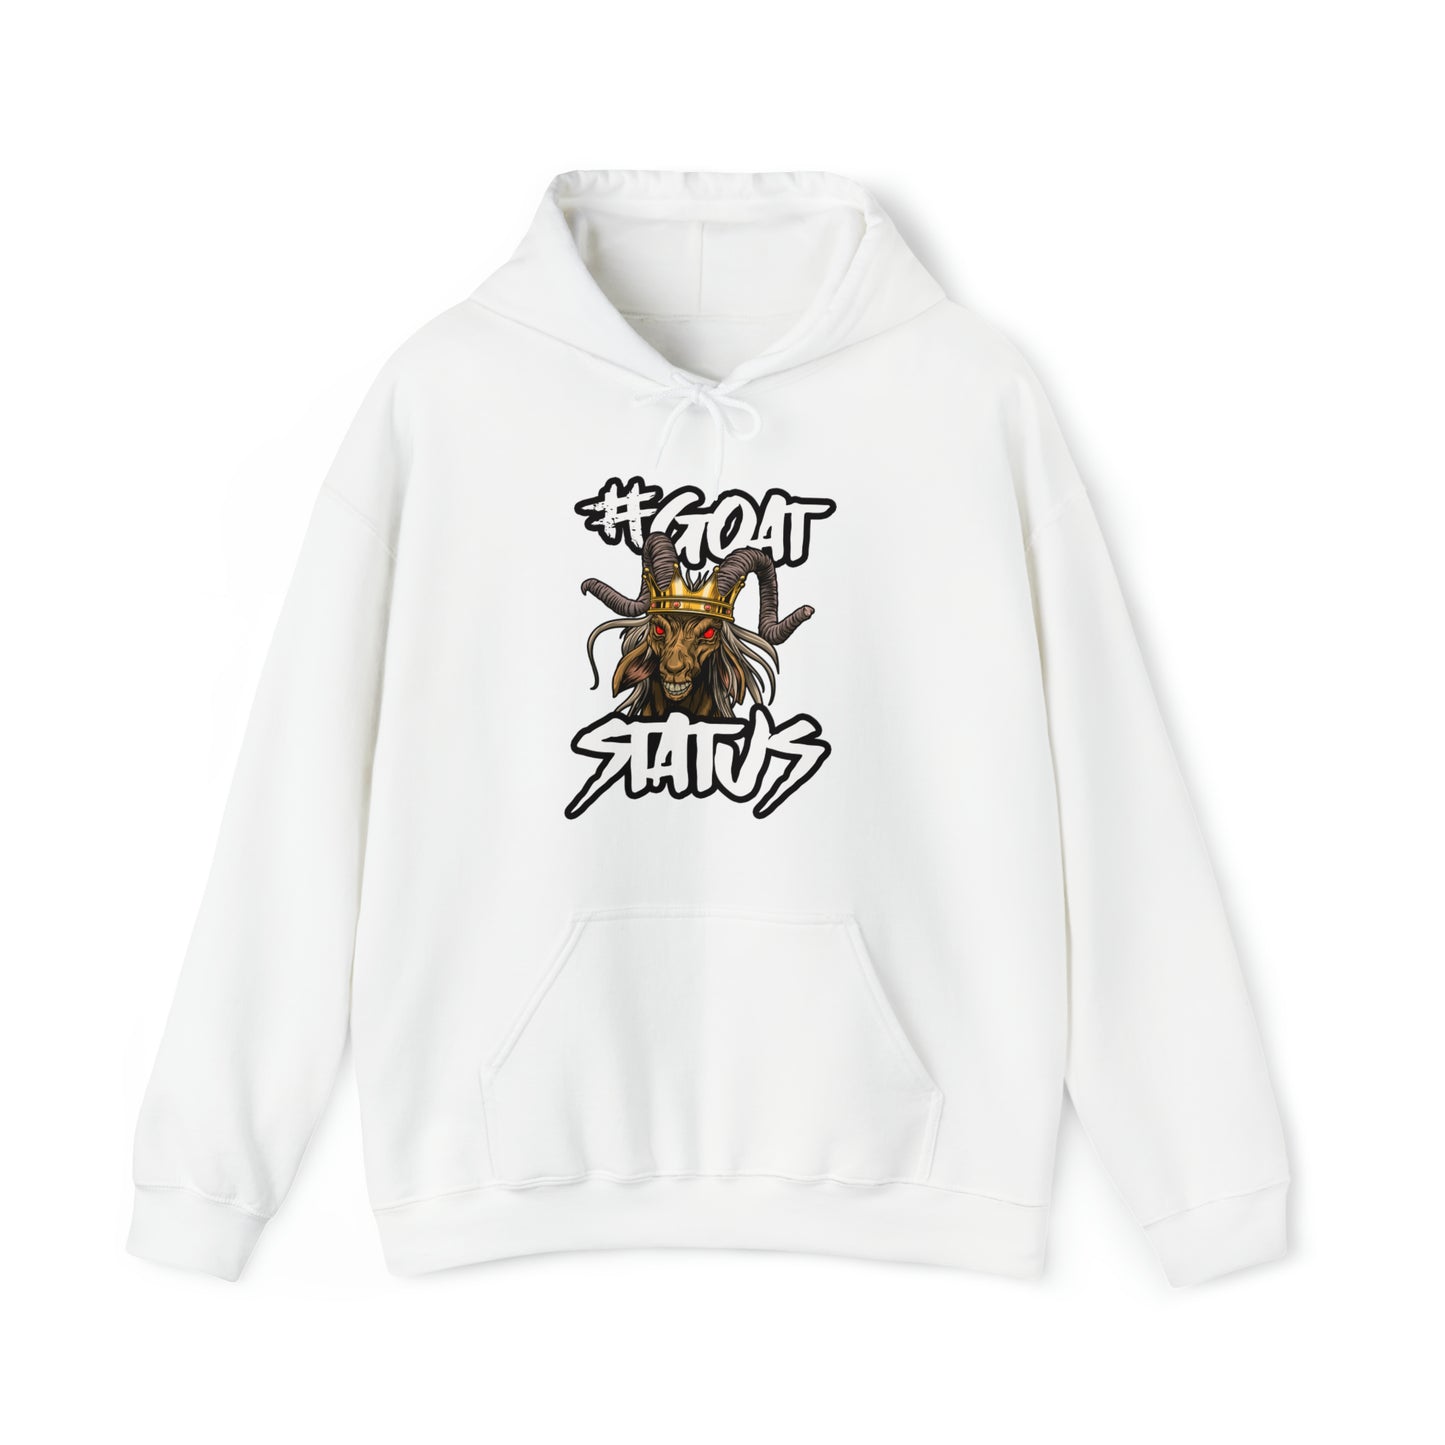 The G.O.A.T. Hoodie